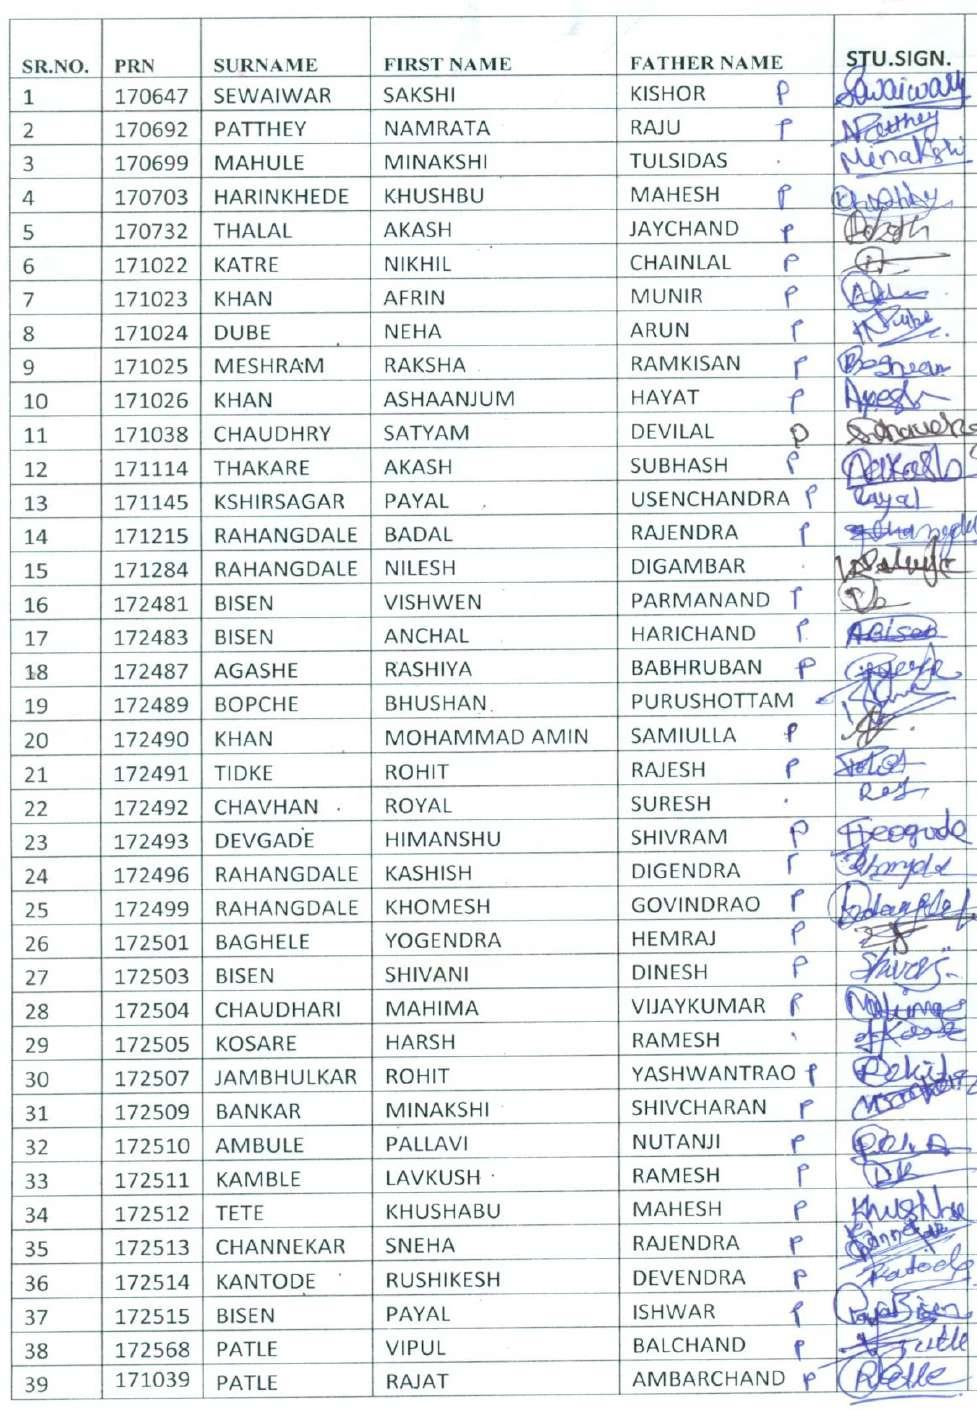 List of students of Industrial